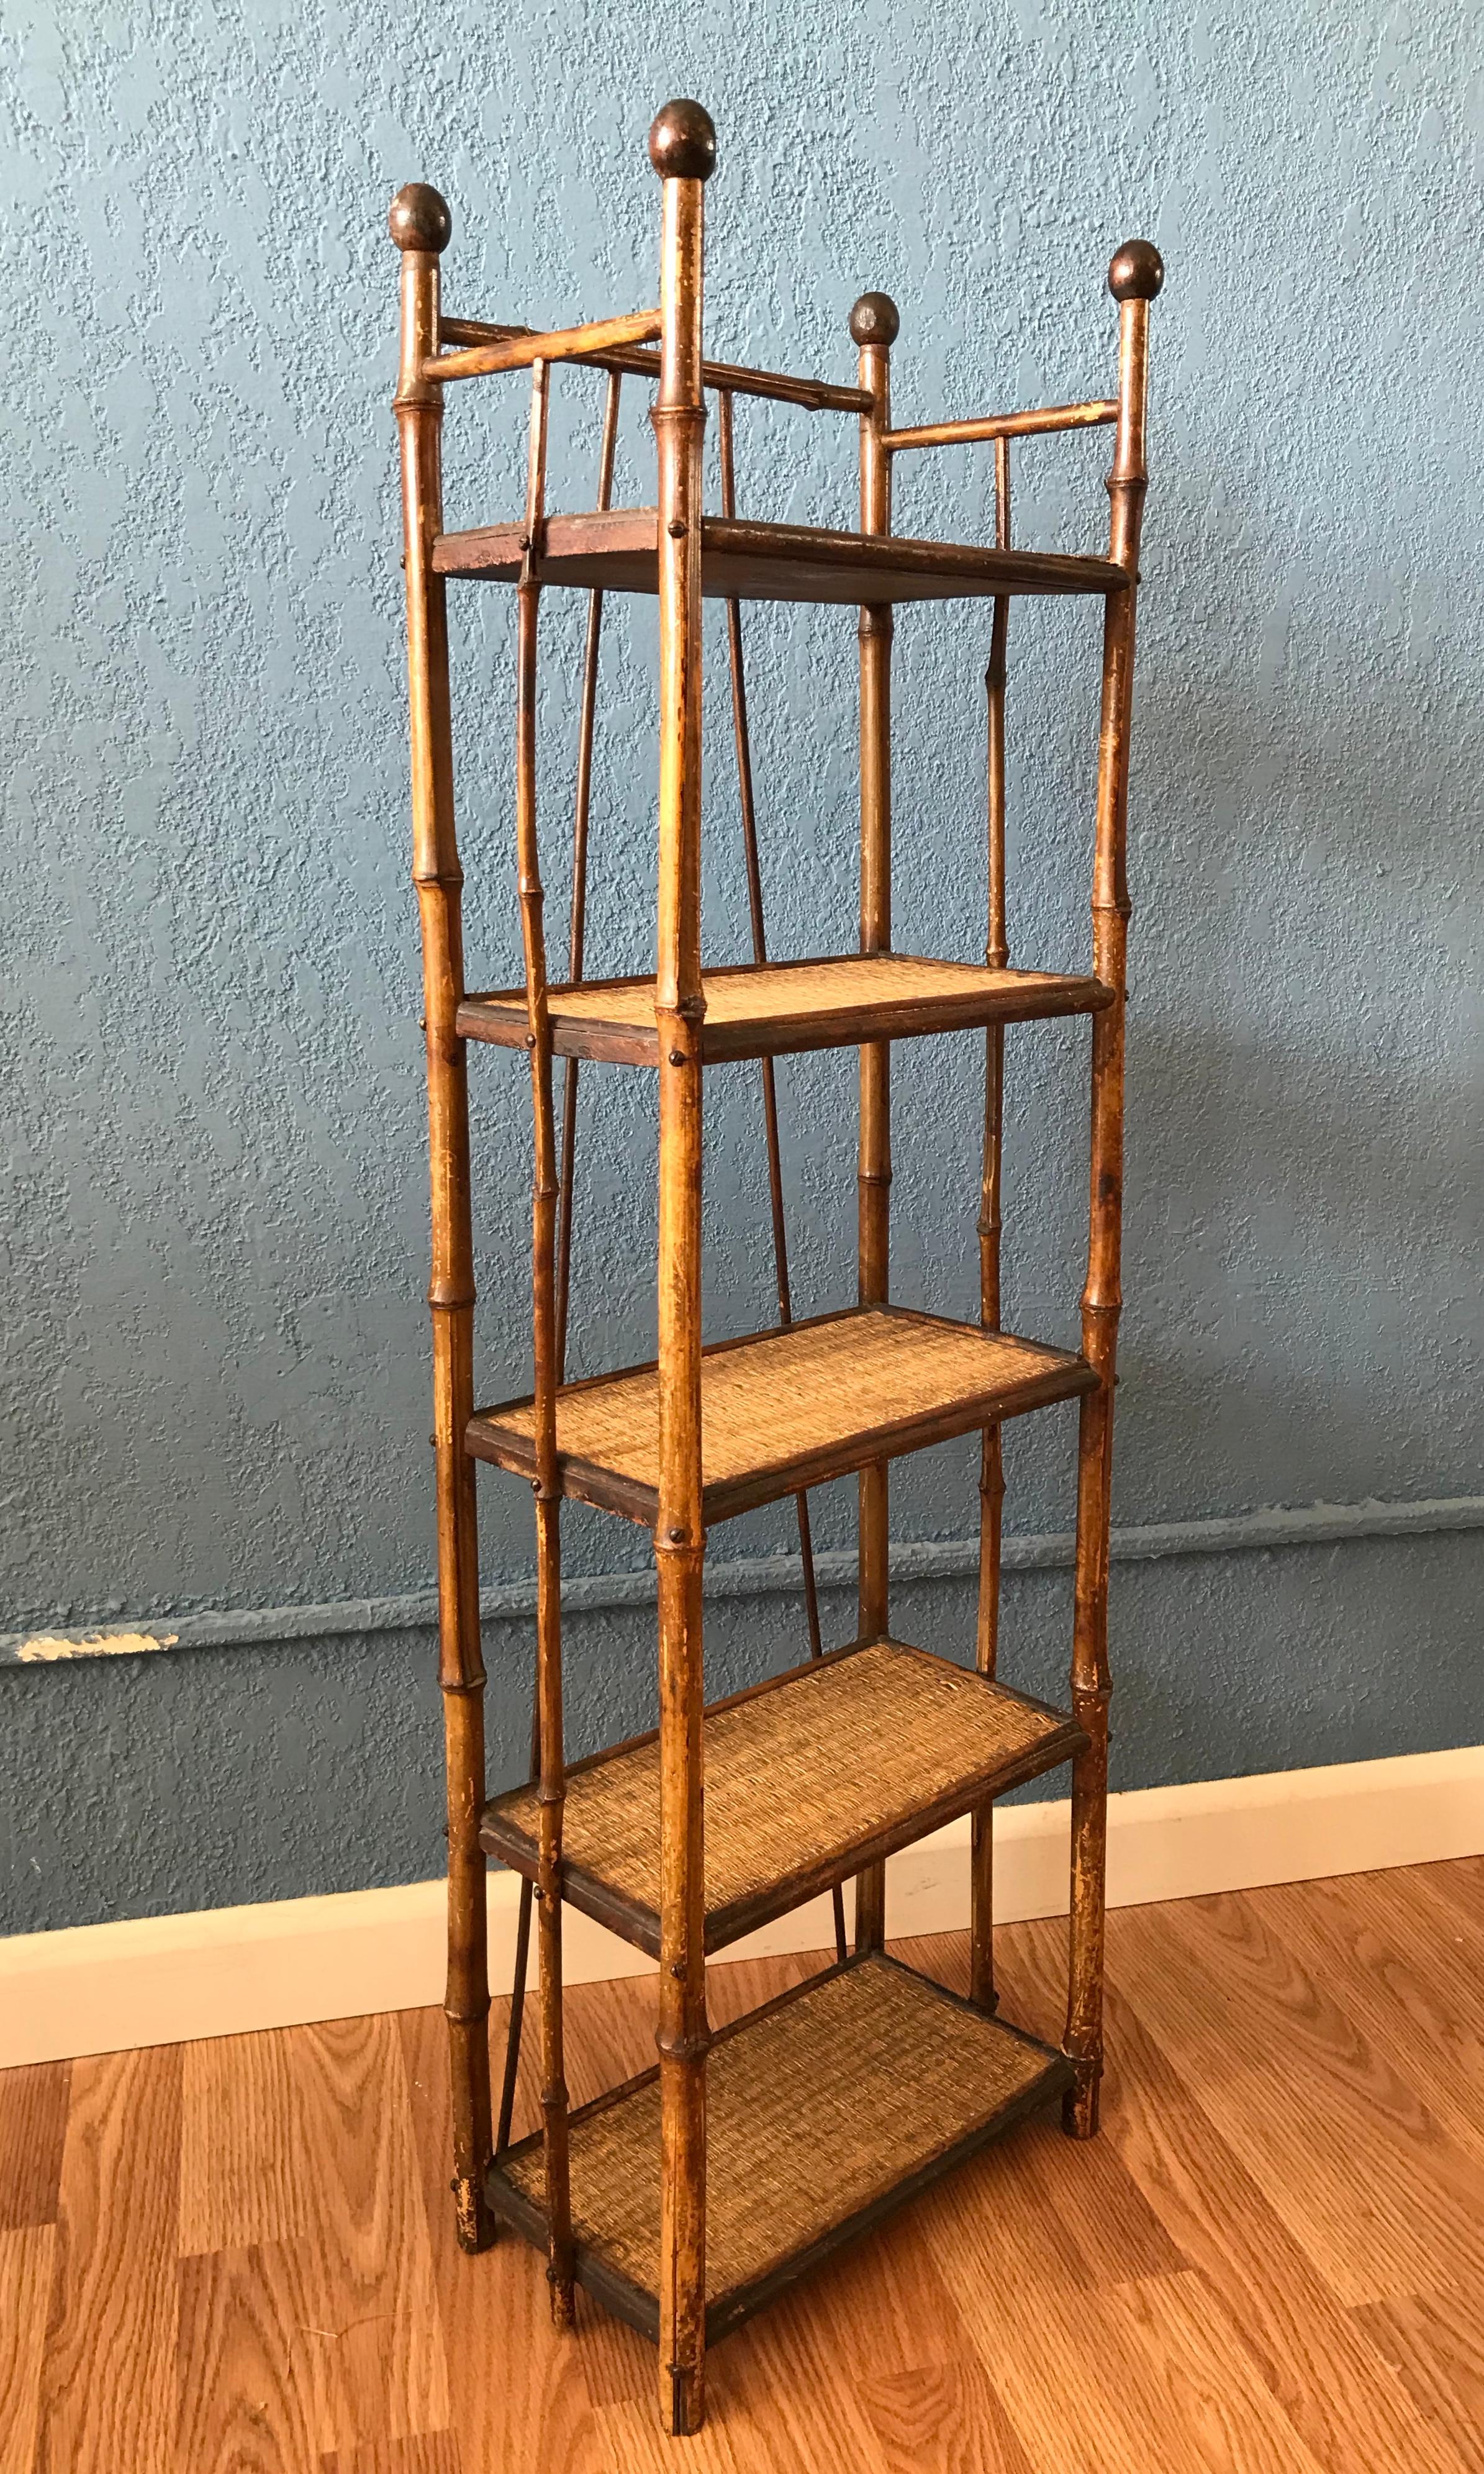 A very fine example - delicate, yet sturdy - the stand may also wall hung.
Unusual size and proportions. 5 shelves including bottom.